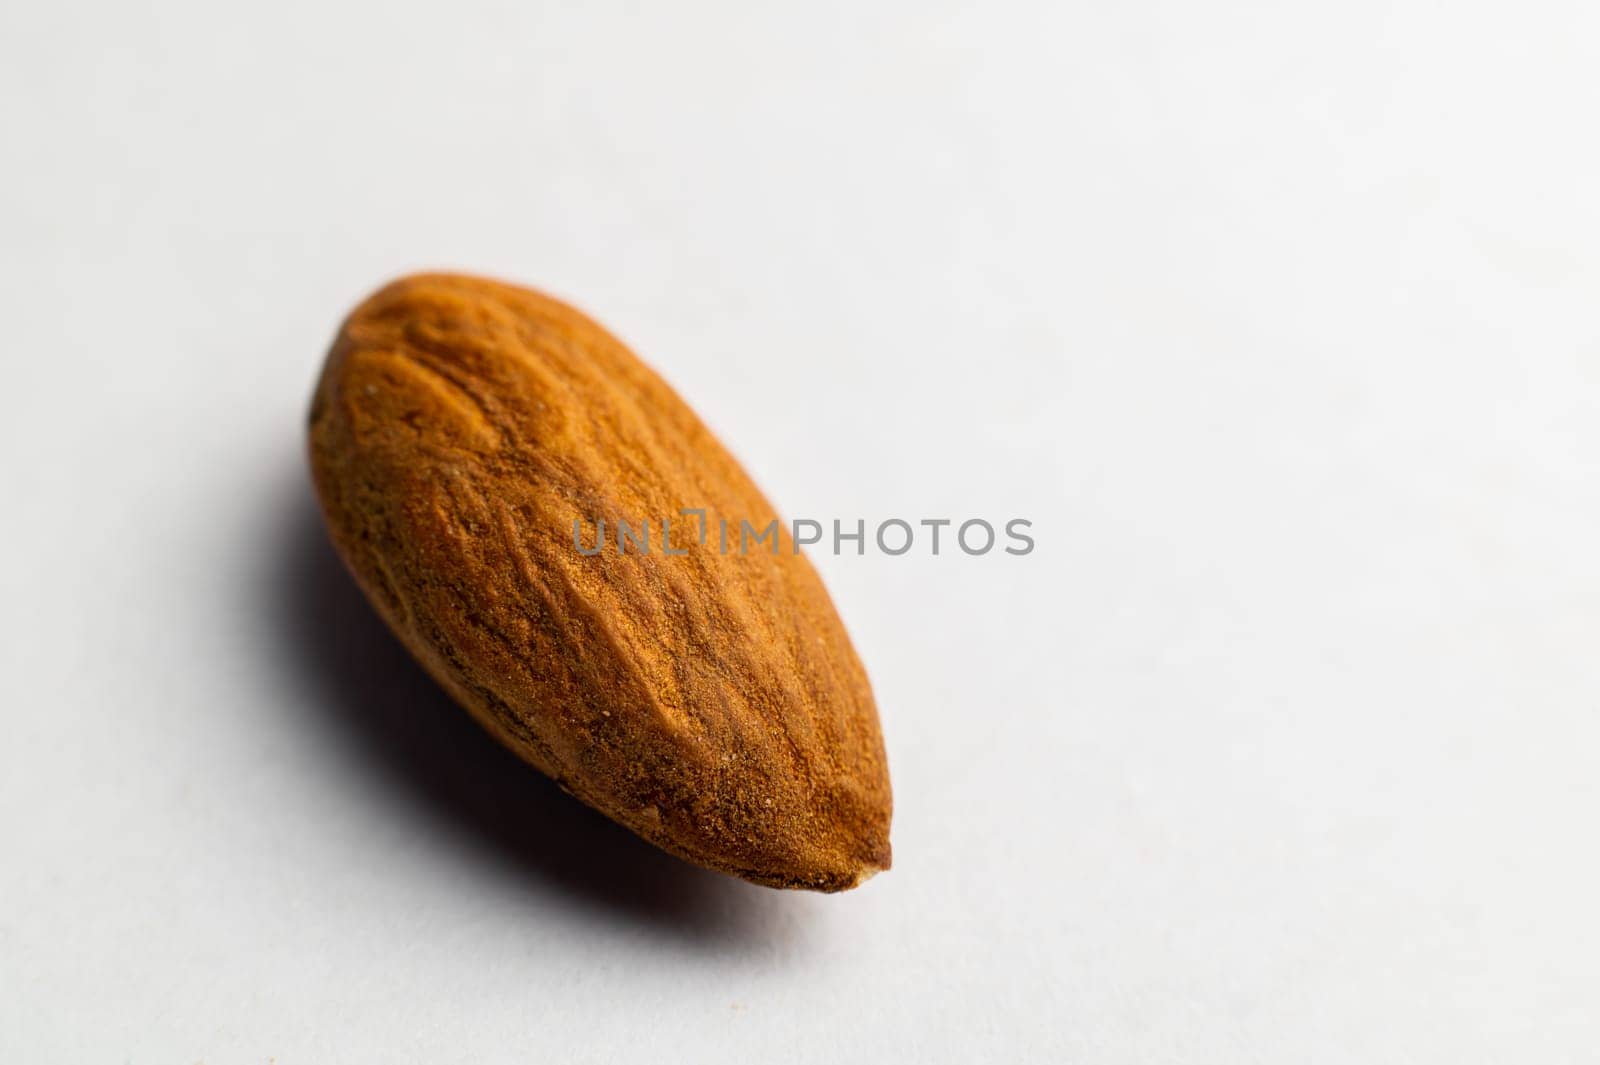 Almonds on a white background, close-up of the seed from the side. One nut macro shot.